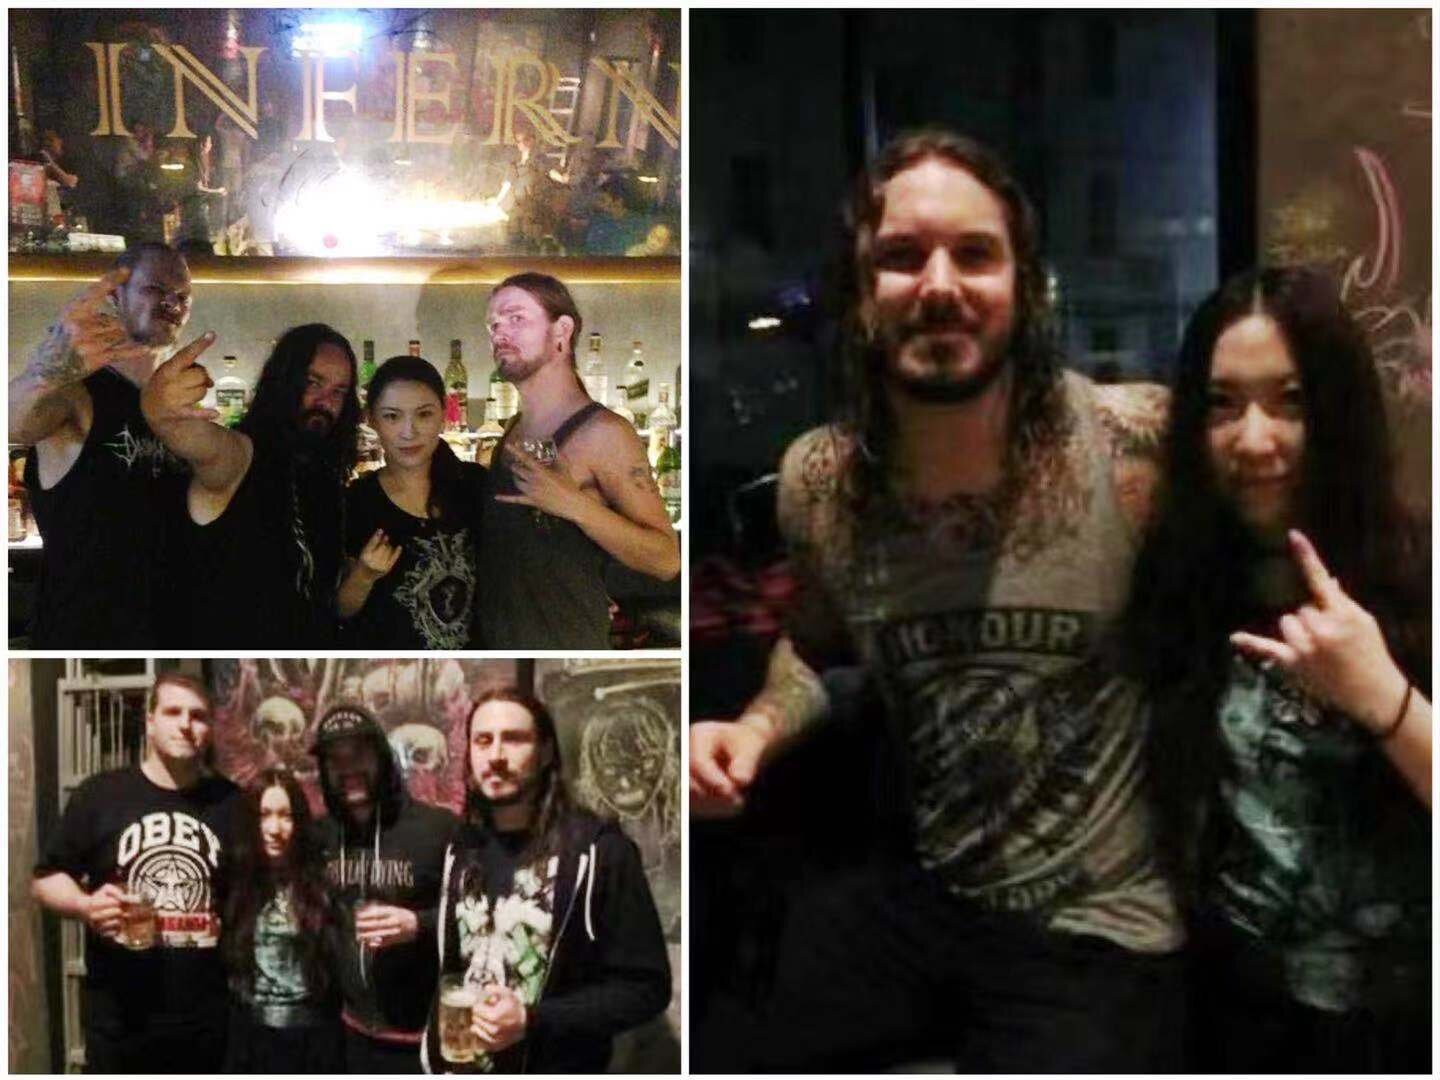 Cassandra Chen: With members of 'As I Lay Dying', 'The Ghost Inside', and 'Finntroll' at the 1st Inferno.